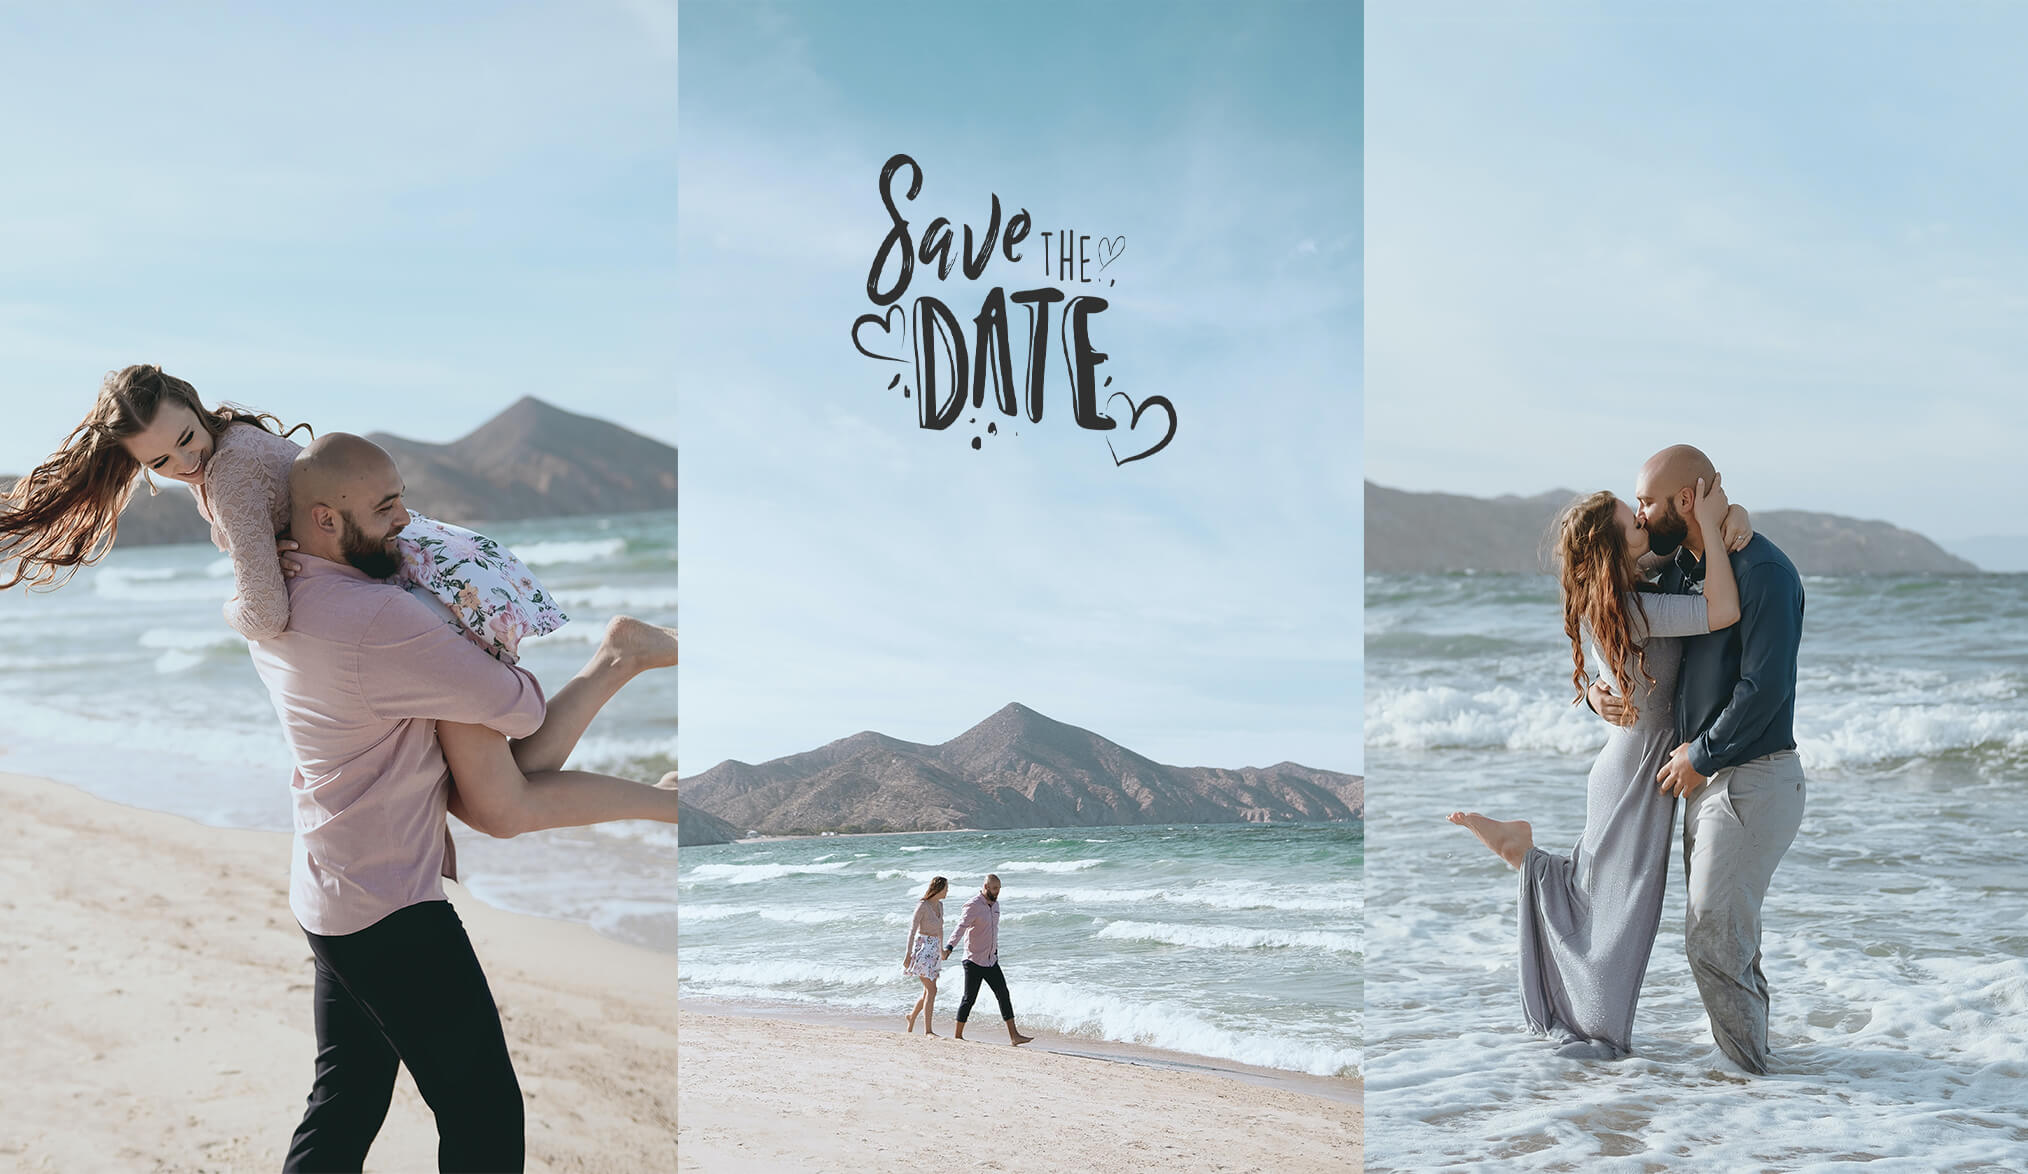 Creative Save the Date Ideas and Tips